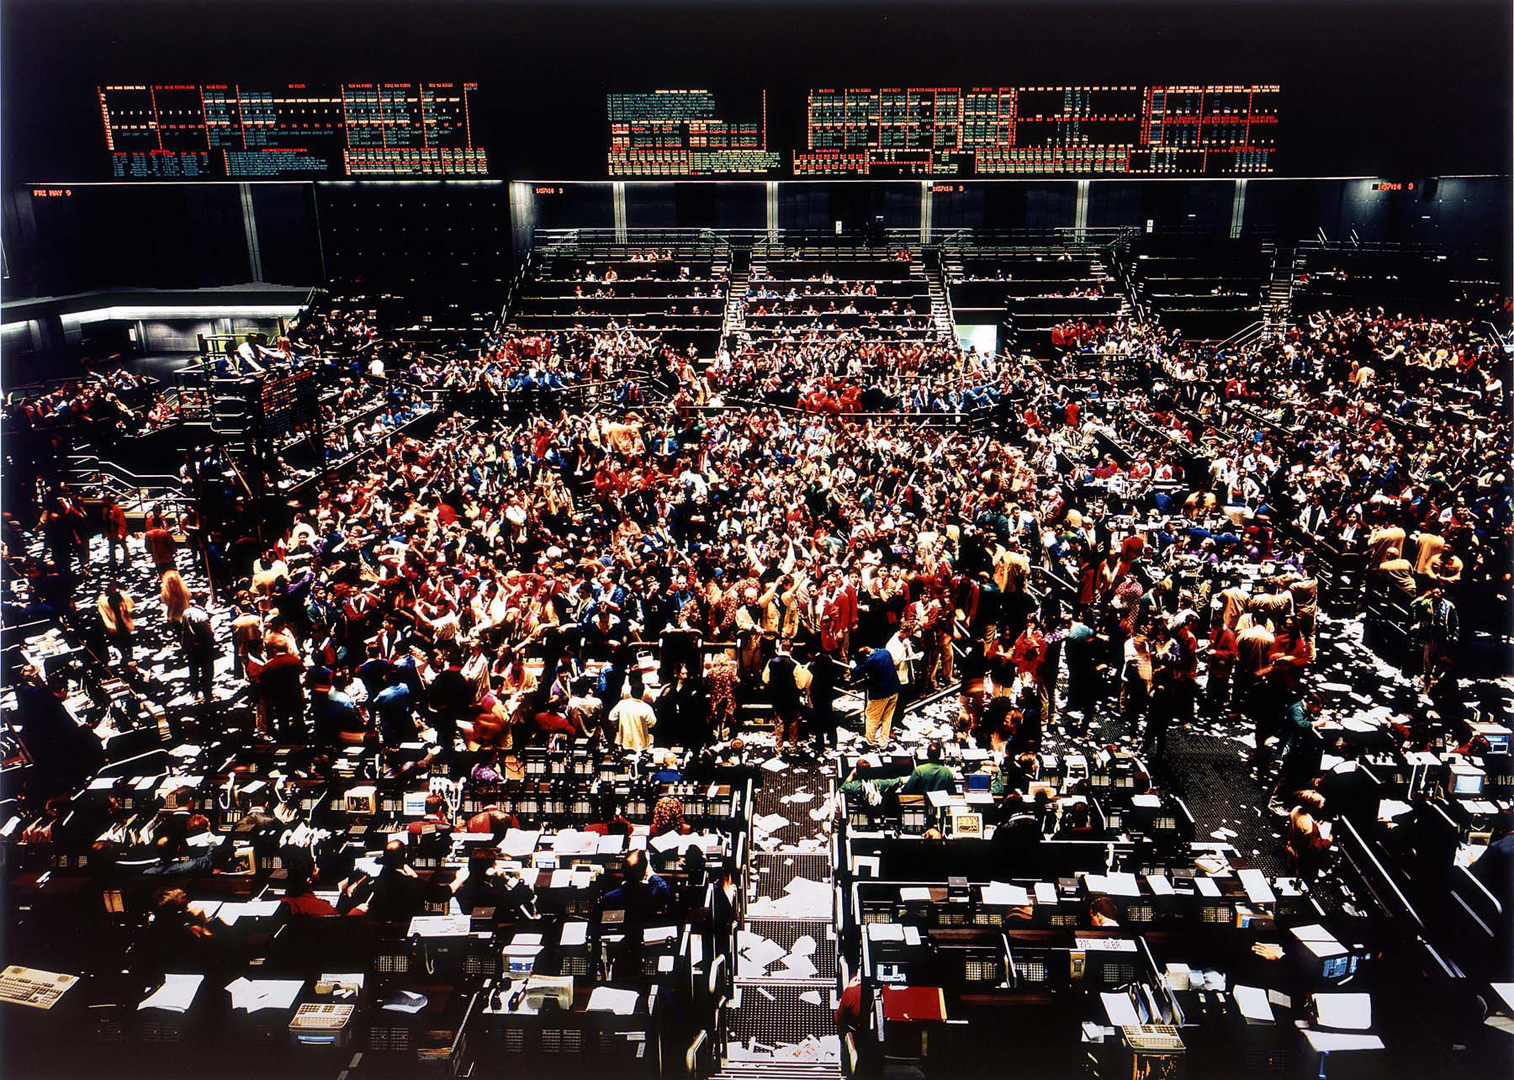 ANDREAS GURSKY